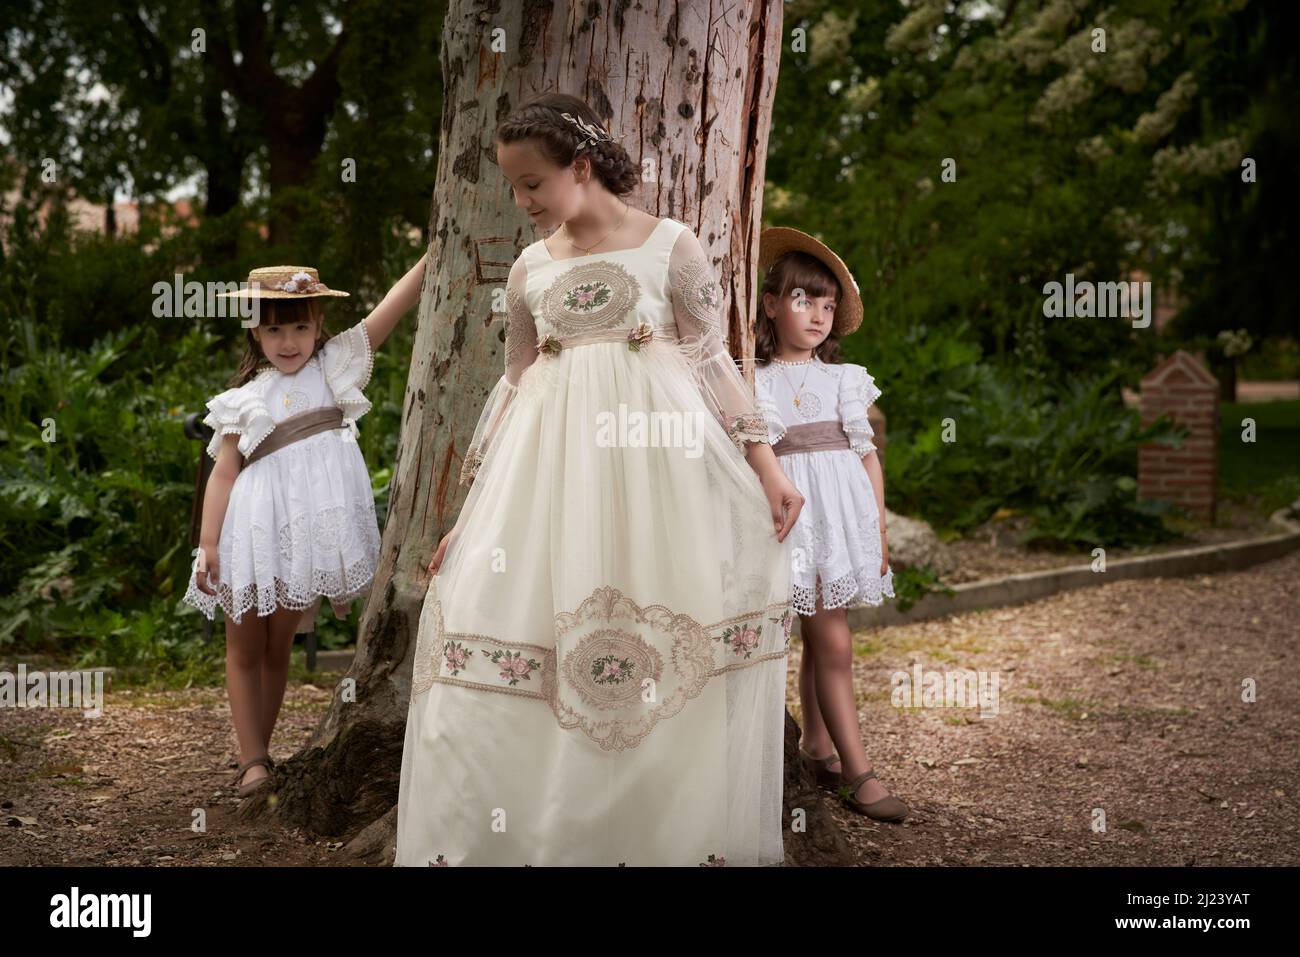 Communion girl posing with her twin little sisters in a park Stock Photo